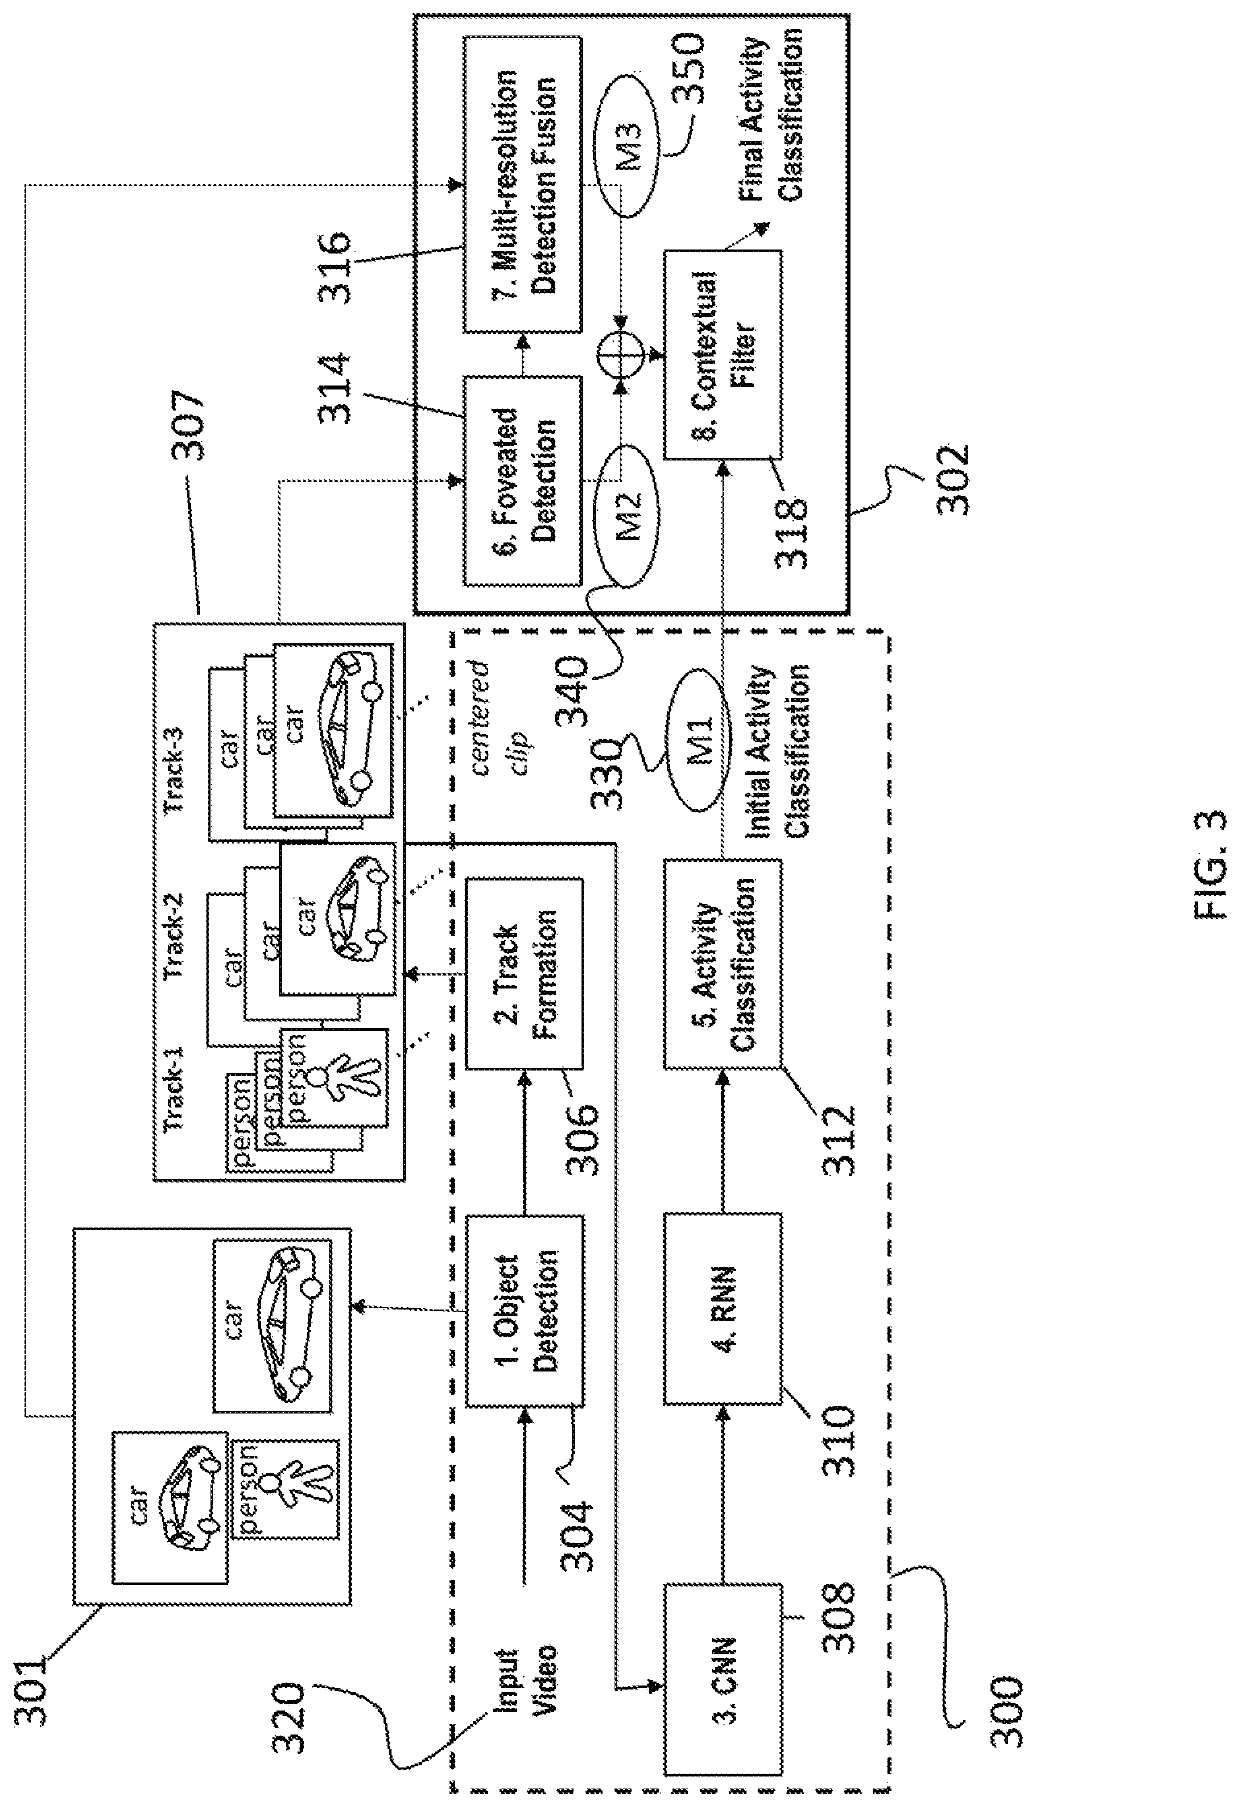 System and method for neuromorphic visual activity classification based on foveated detection and contextual filtering